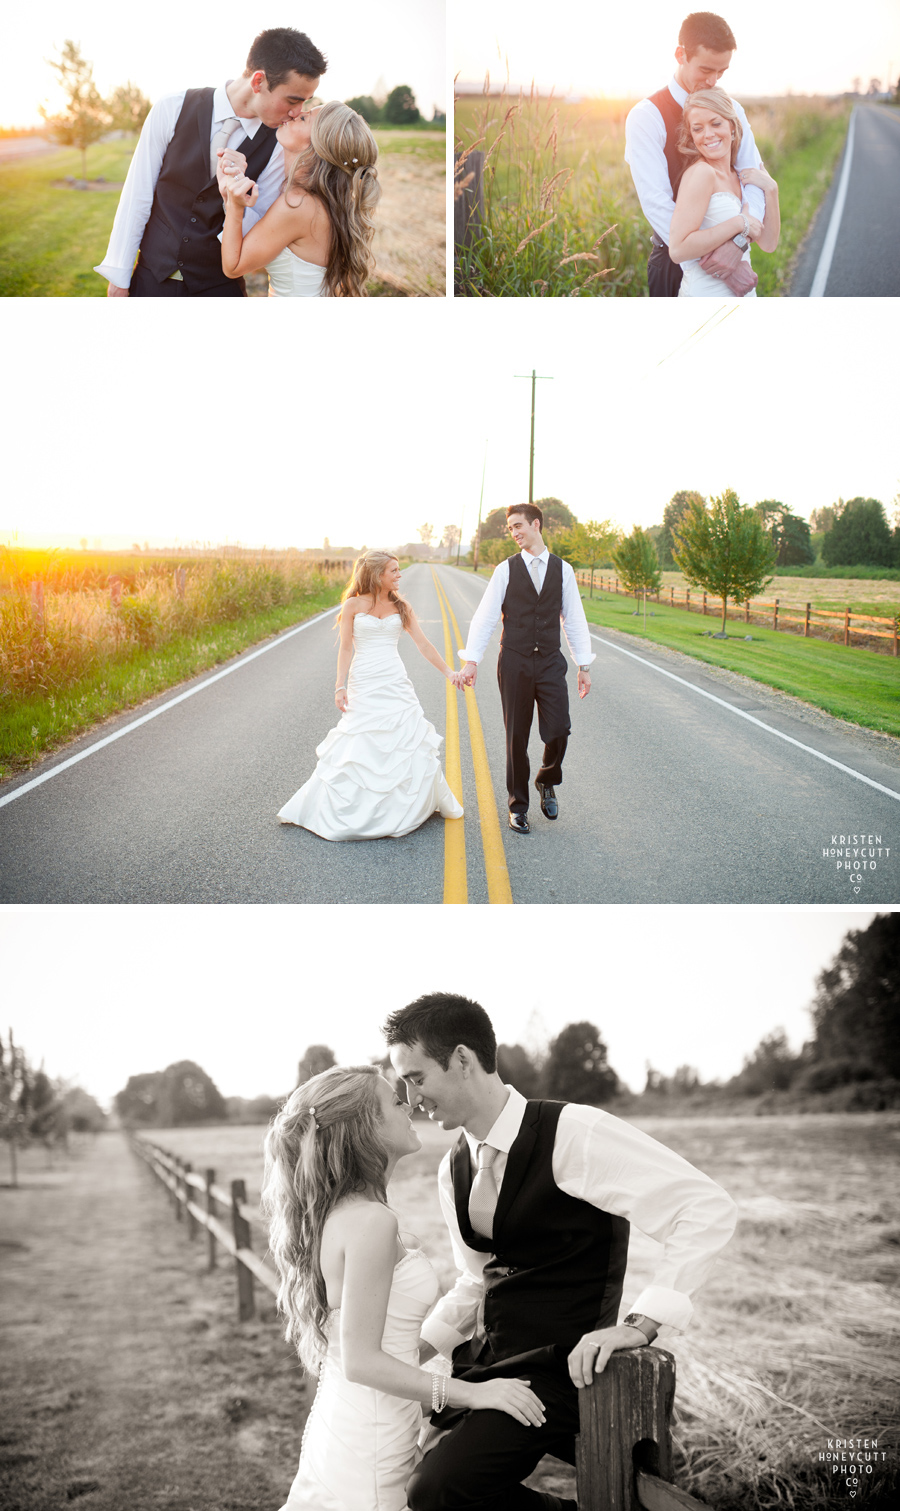 Kristen Honeycutt Photo Co. Sunset Bride and Groom portraits with the newlyweds 